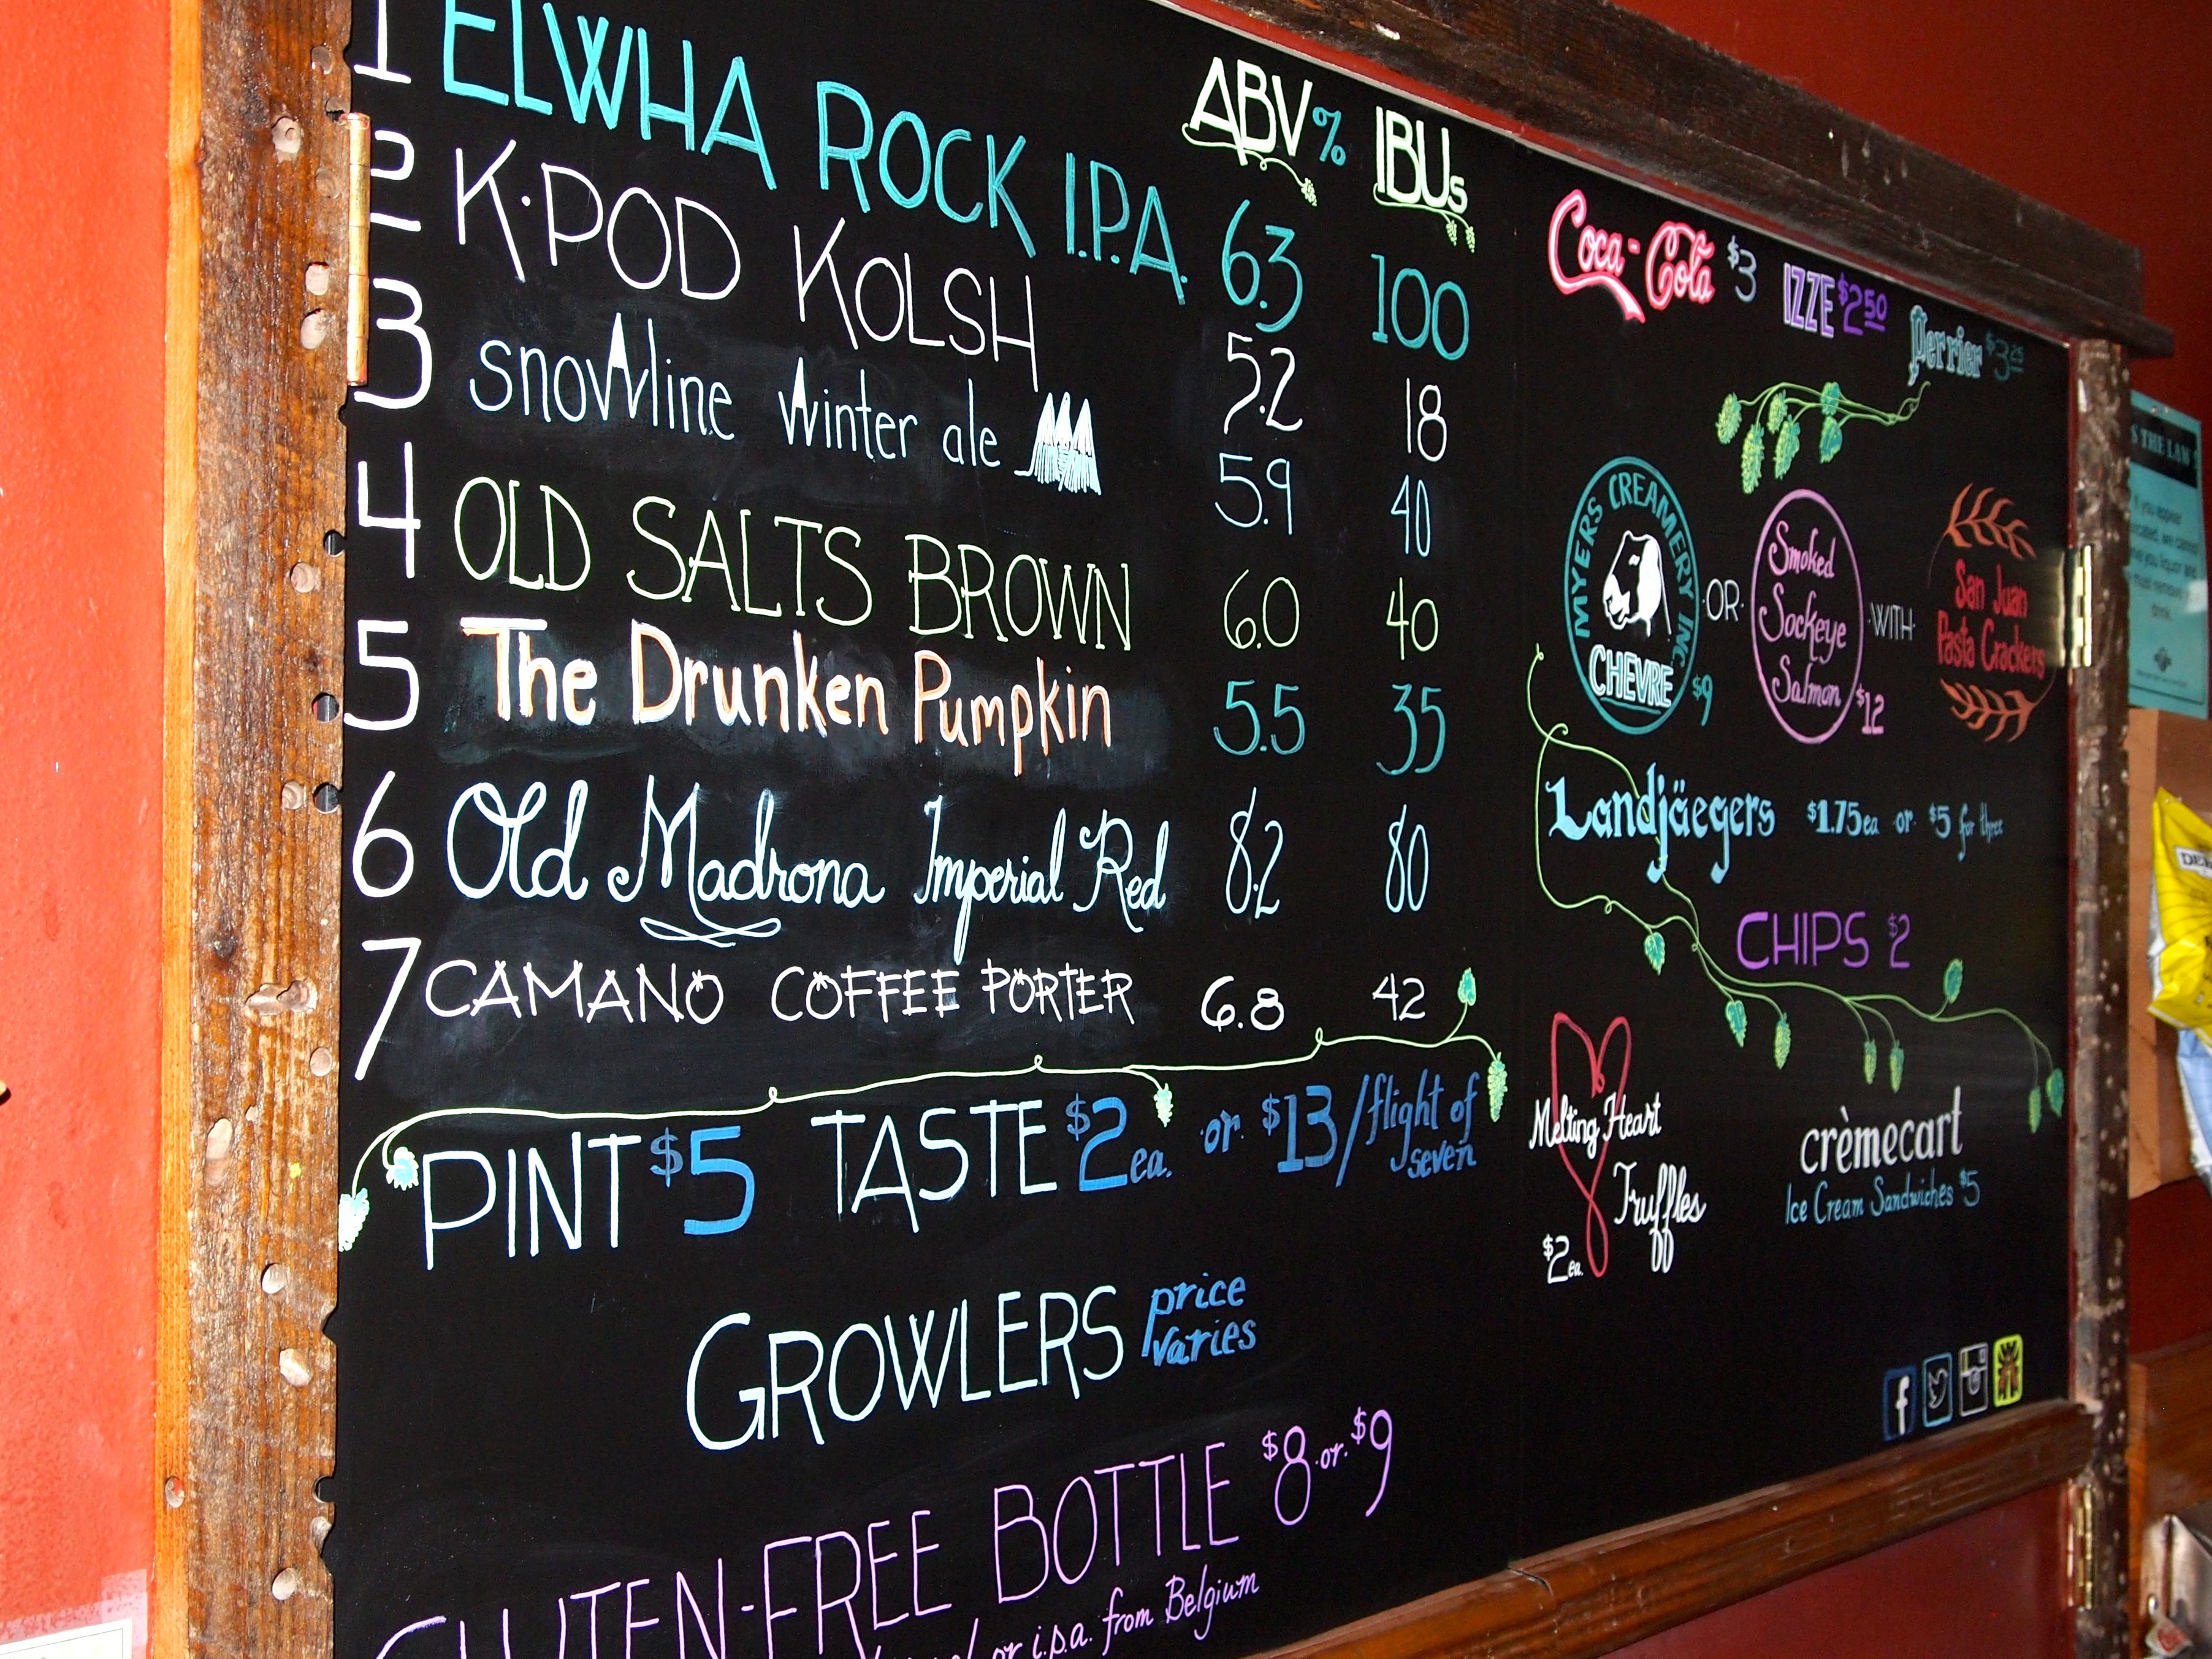 Beer selection currently on tap is listed on the board. I'll take a #1, thanks!